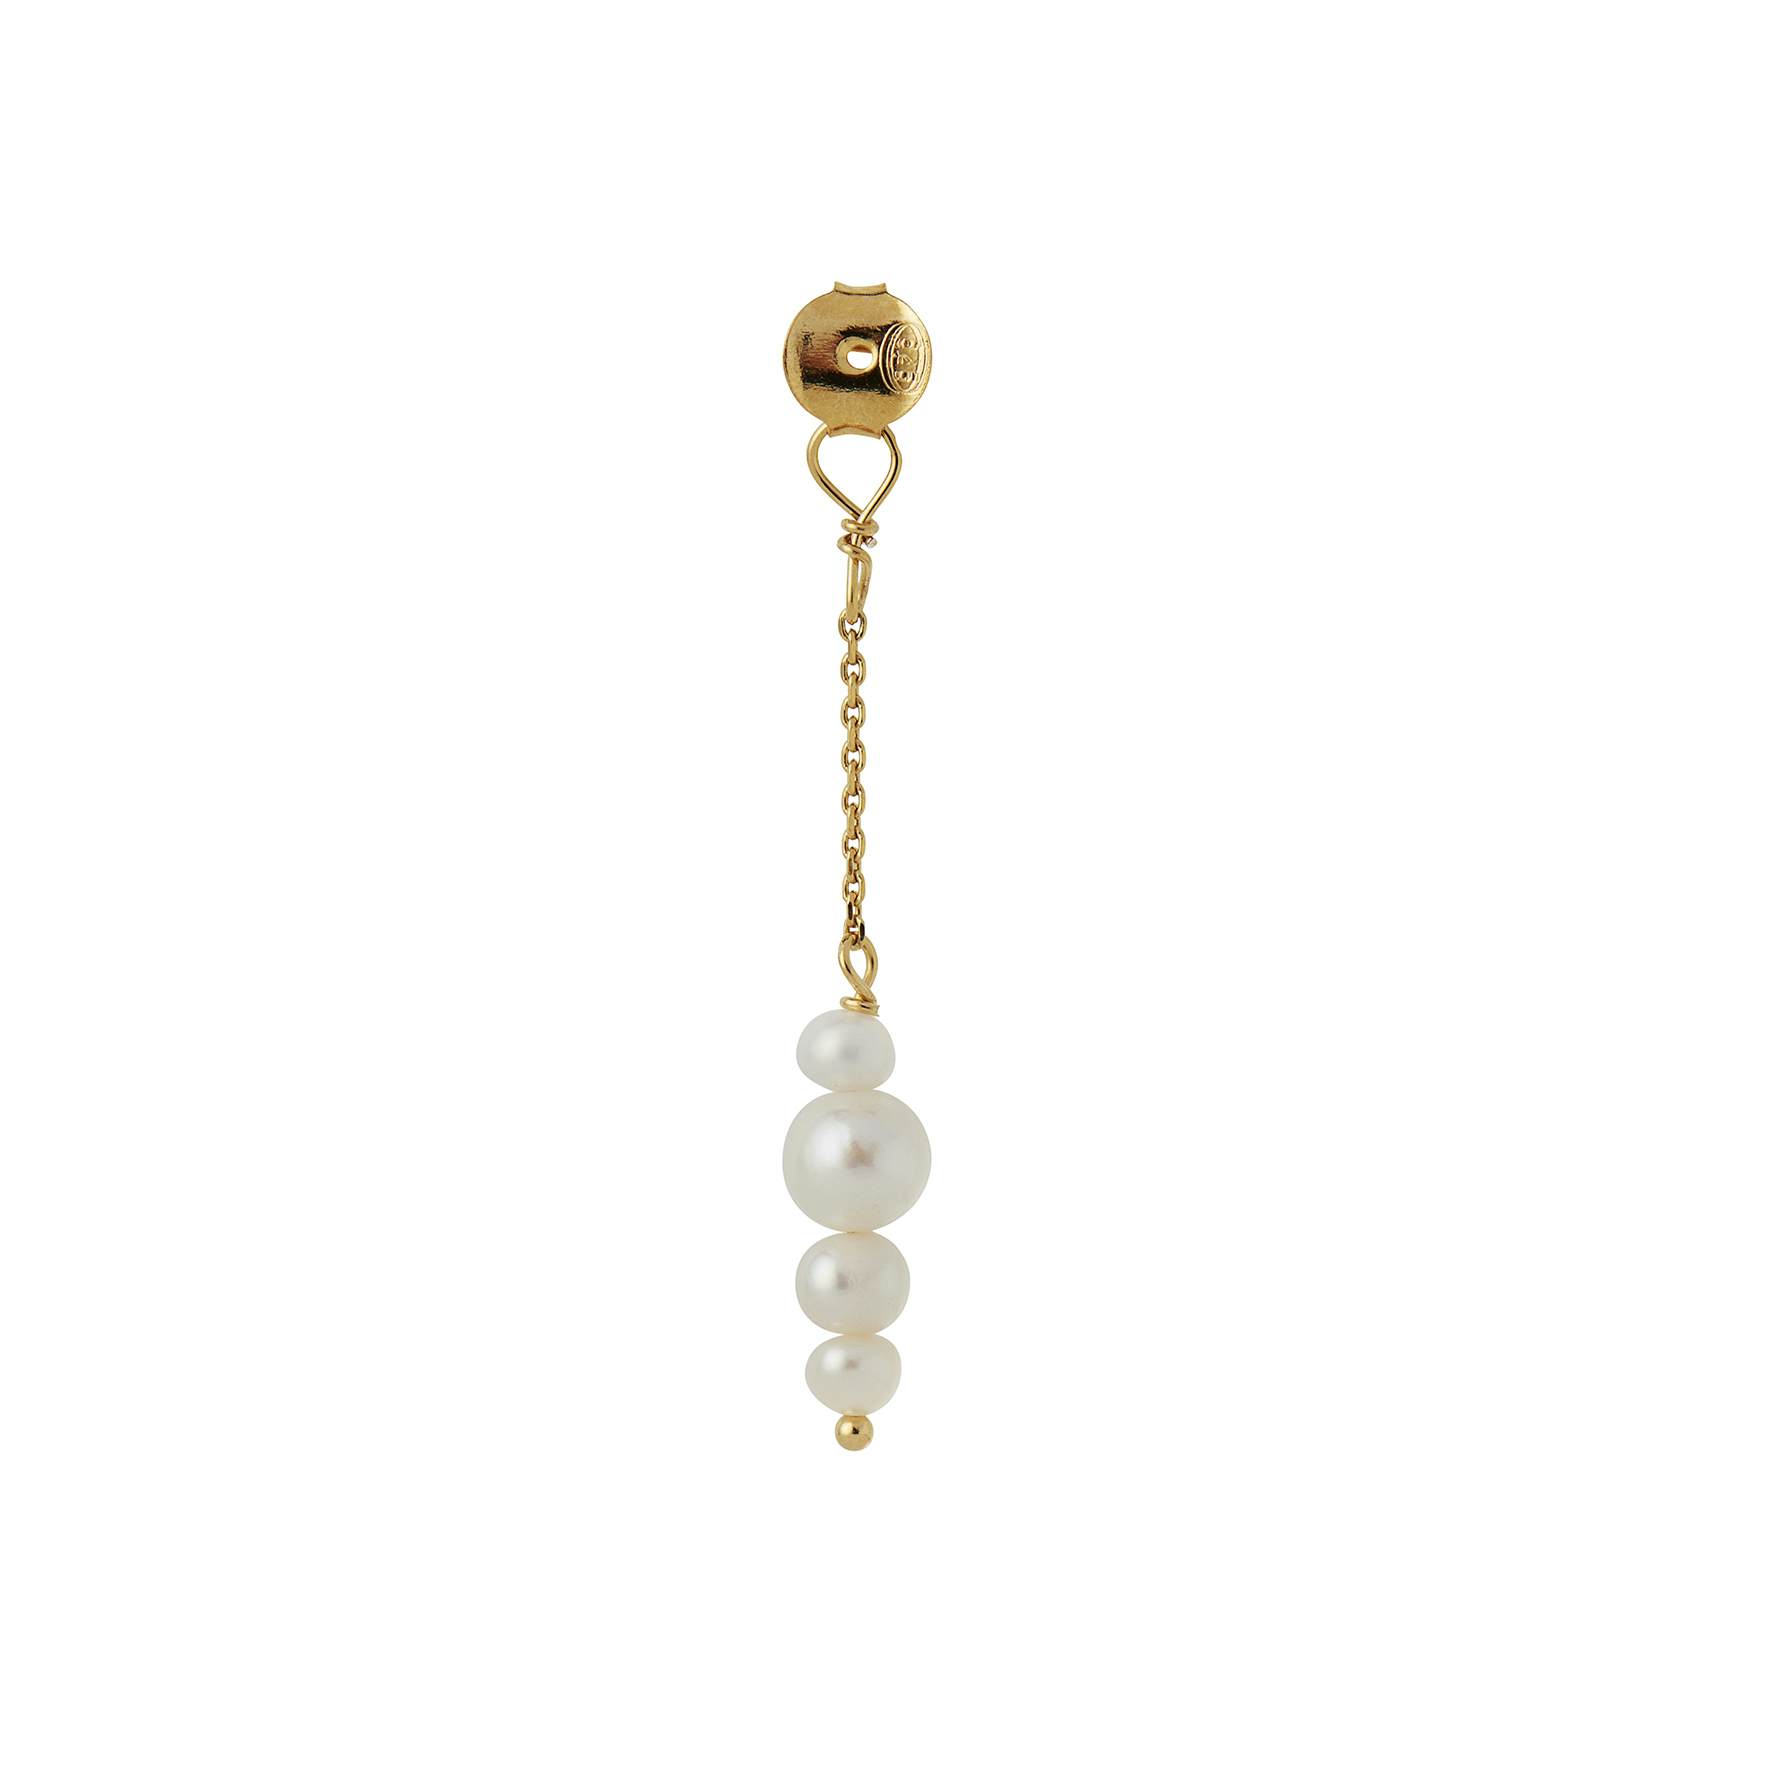 Pearl Berries Behind Ear Earring fra STINE A Jewelry i Forgyldt-Sølv Sterling 925